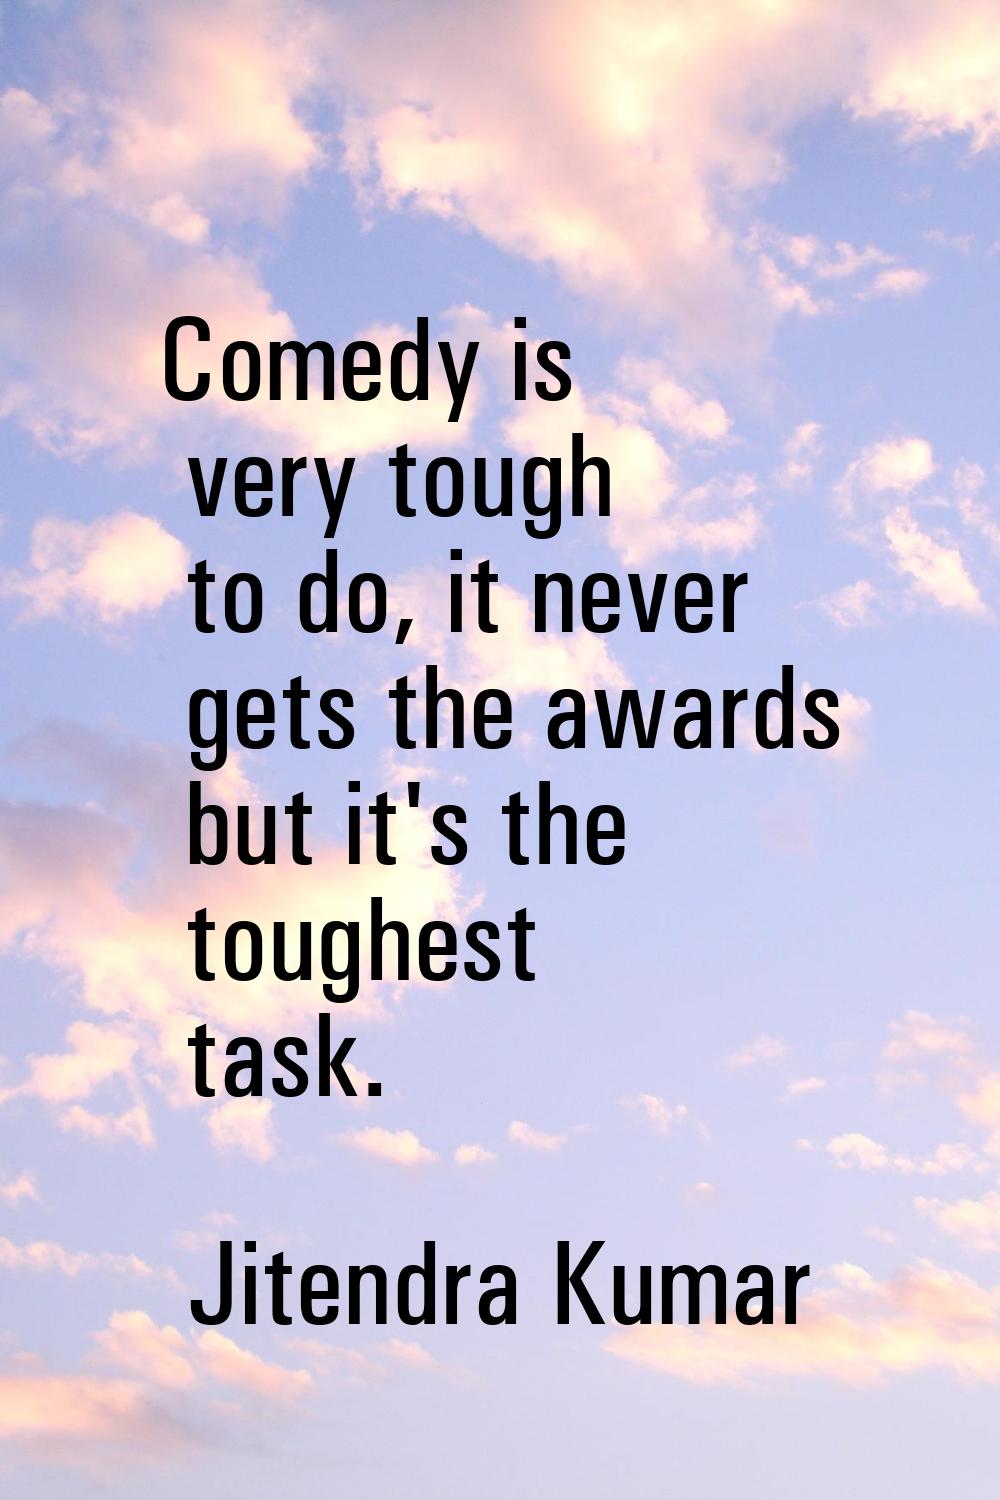 Comedy is very tough to do, it never gets the awards but it's the toughest task.